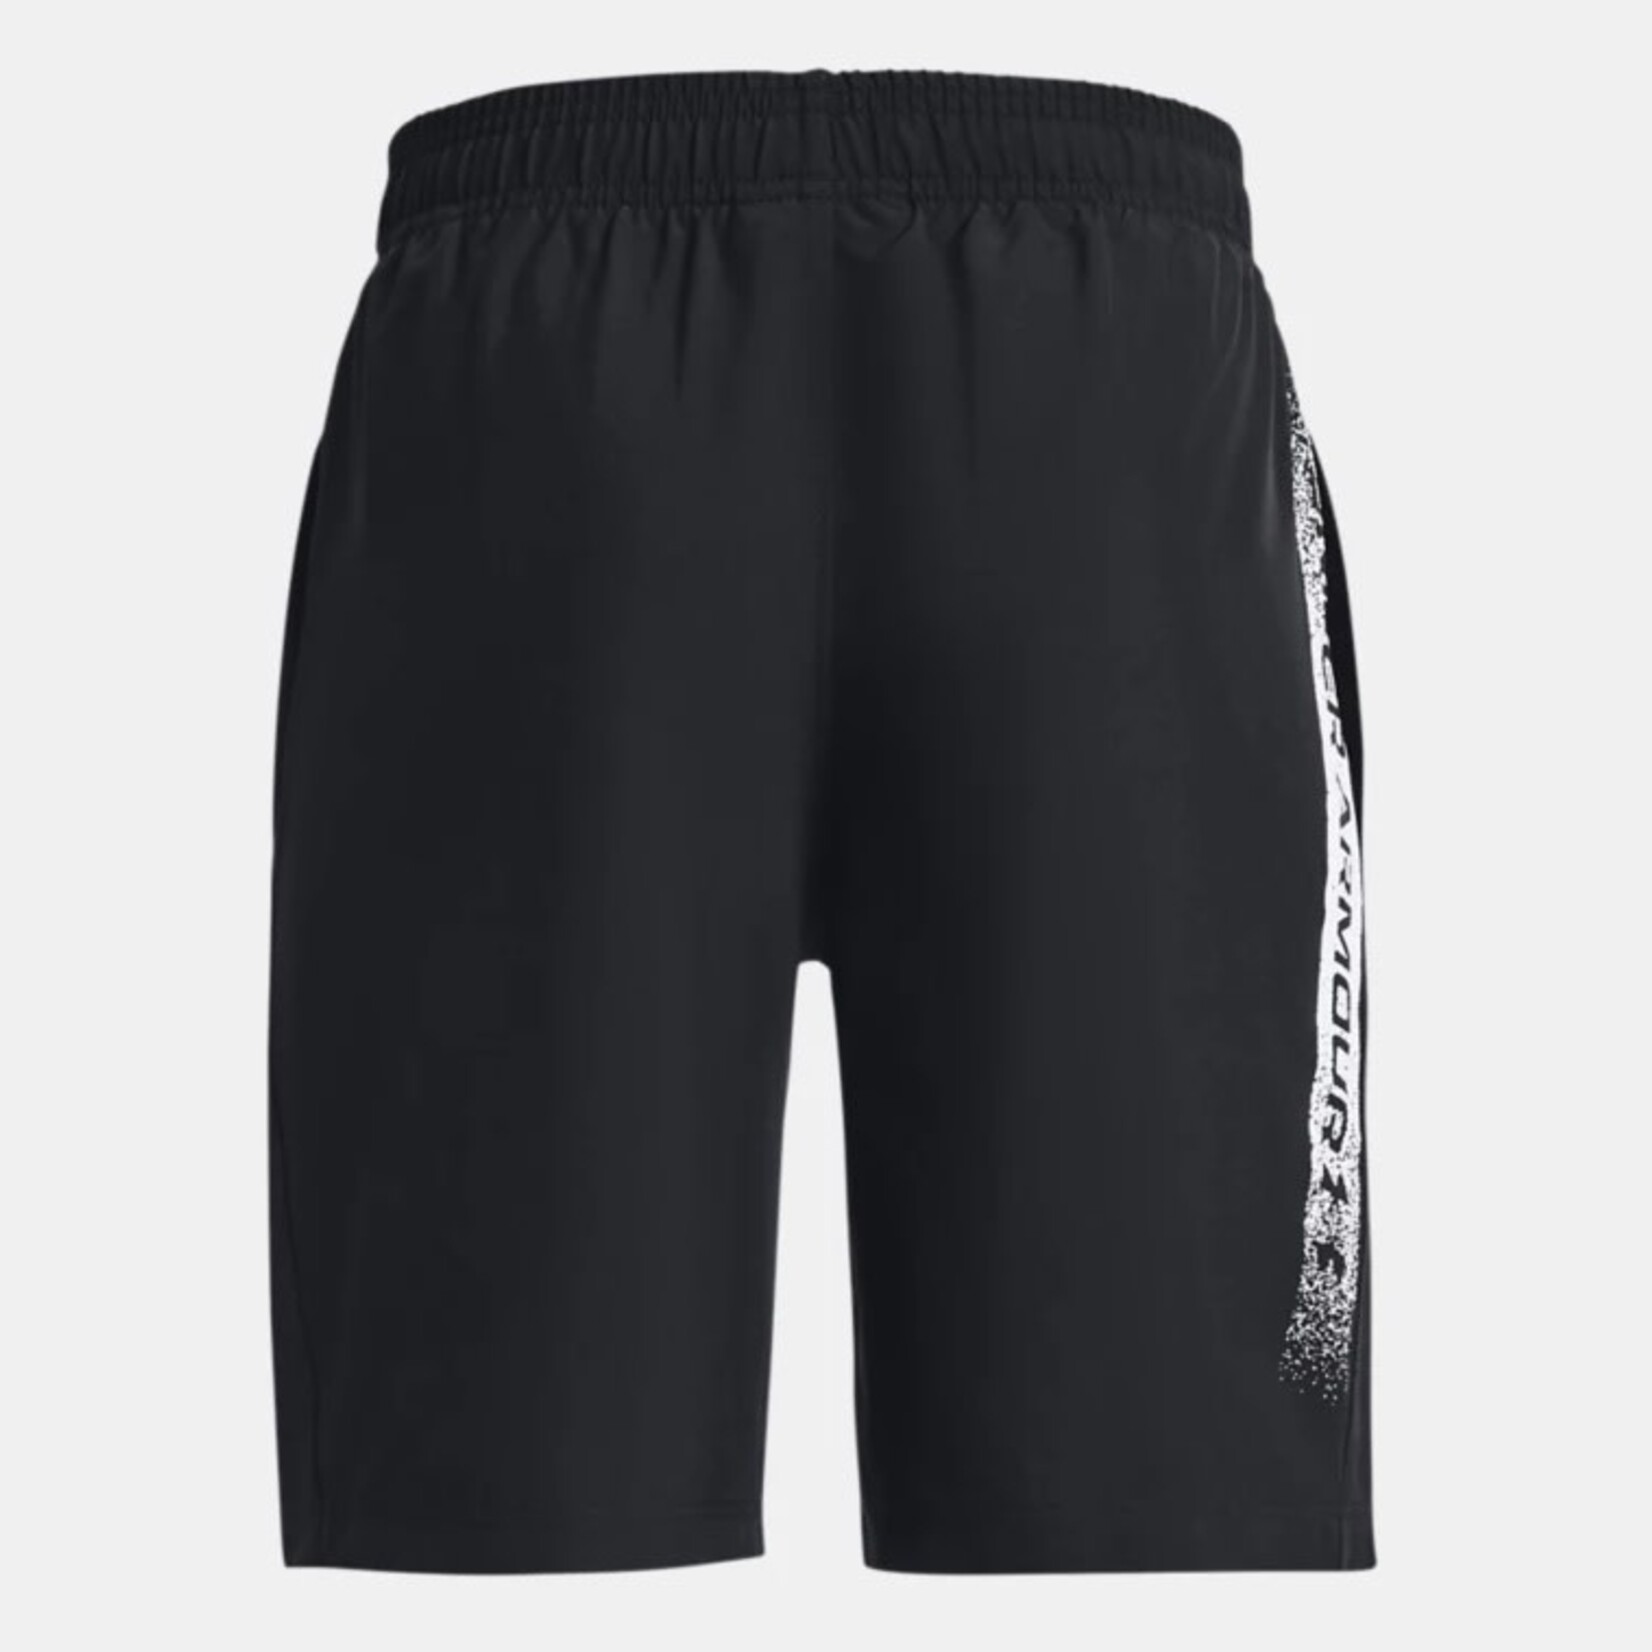 Under Armour Under Armour Shorts, Woven Graphic, Boys